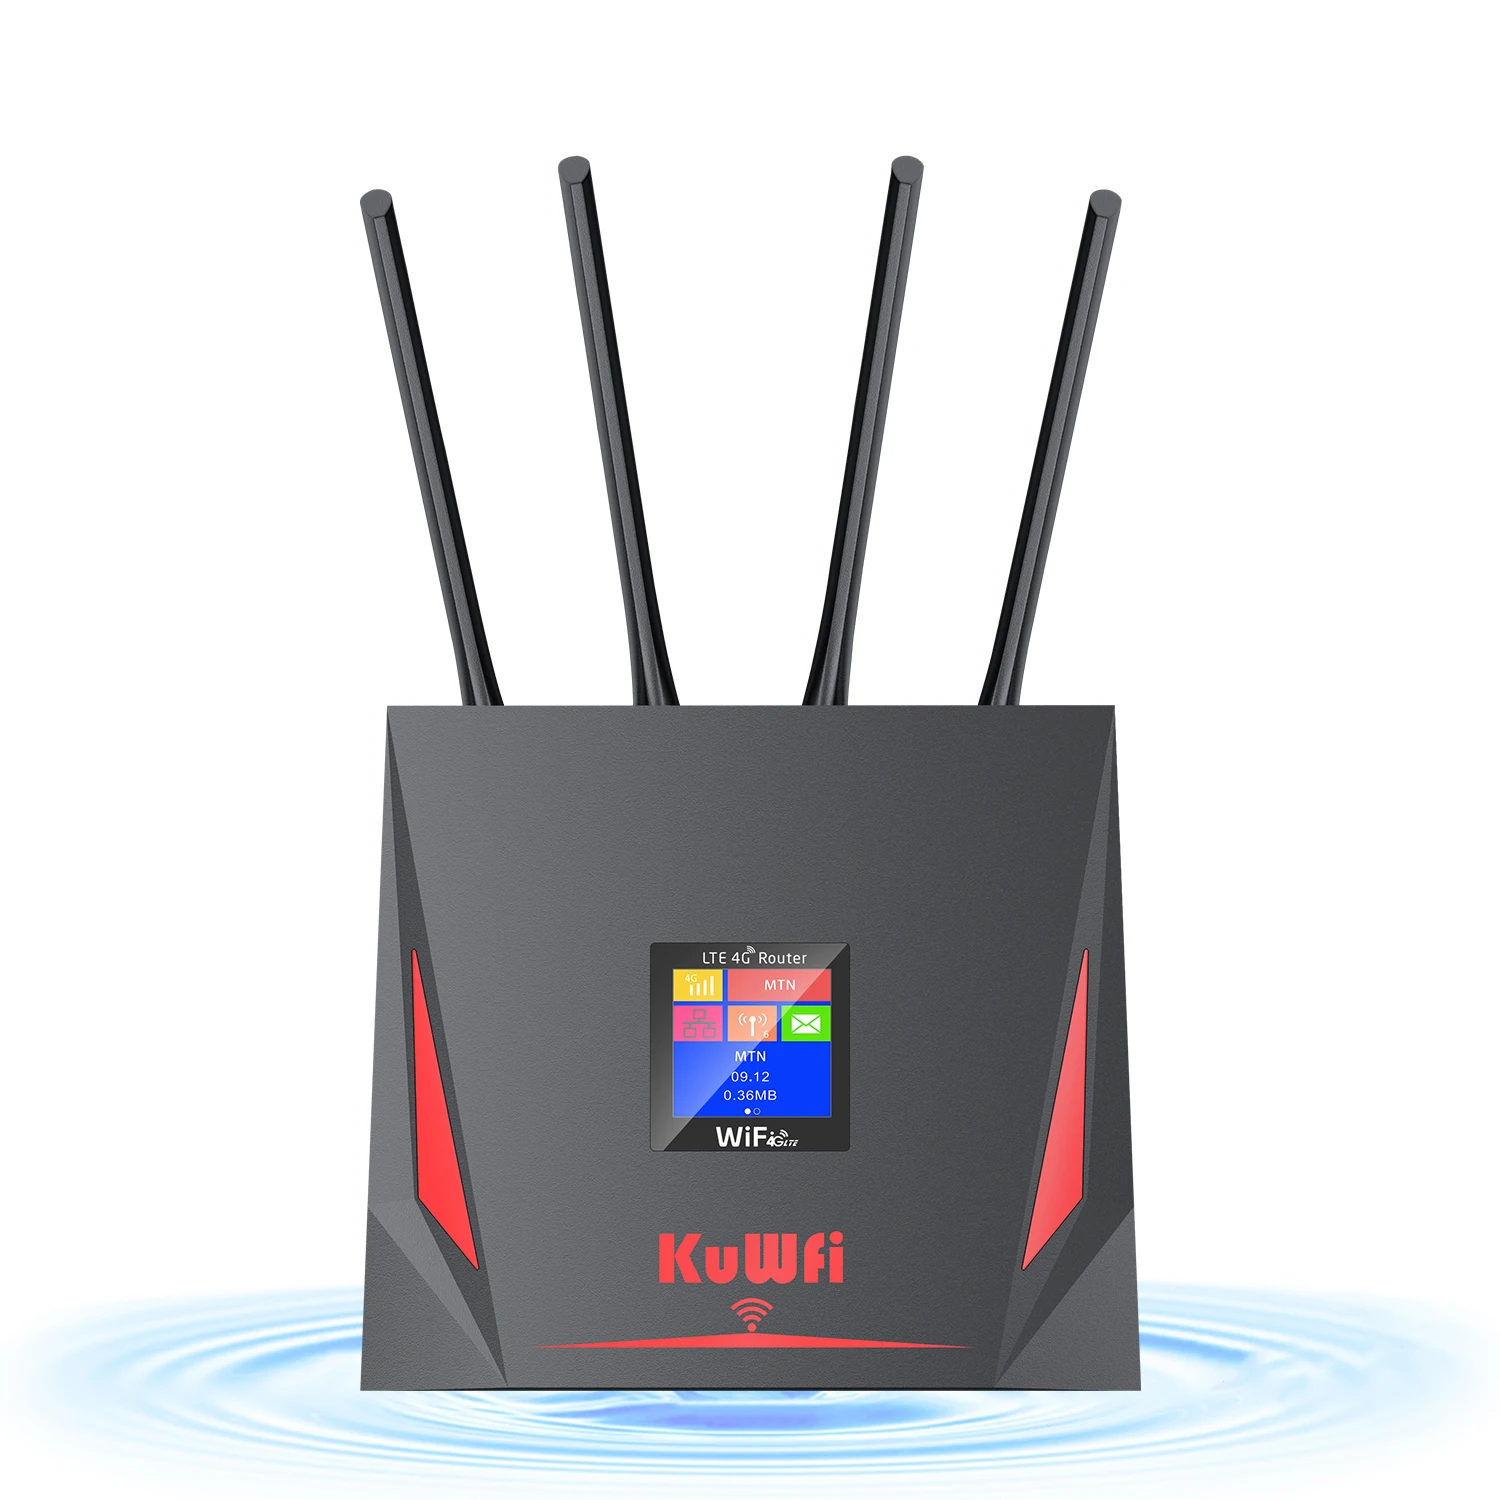 

New Released KuWFi 4G WiFi Router 300Mbps 2.4Ghz Unlocked Wireless router 4g LTE Modem WiFi Router with Sim Card Slot